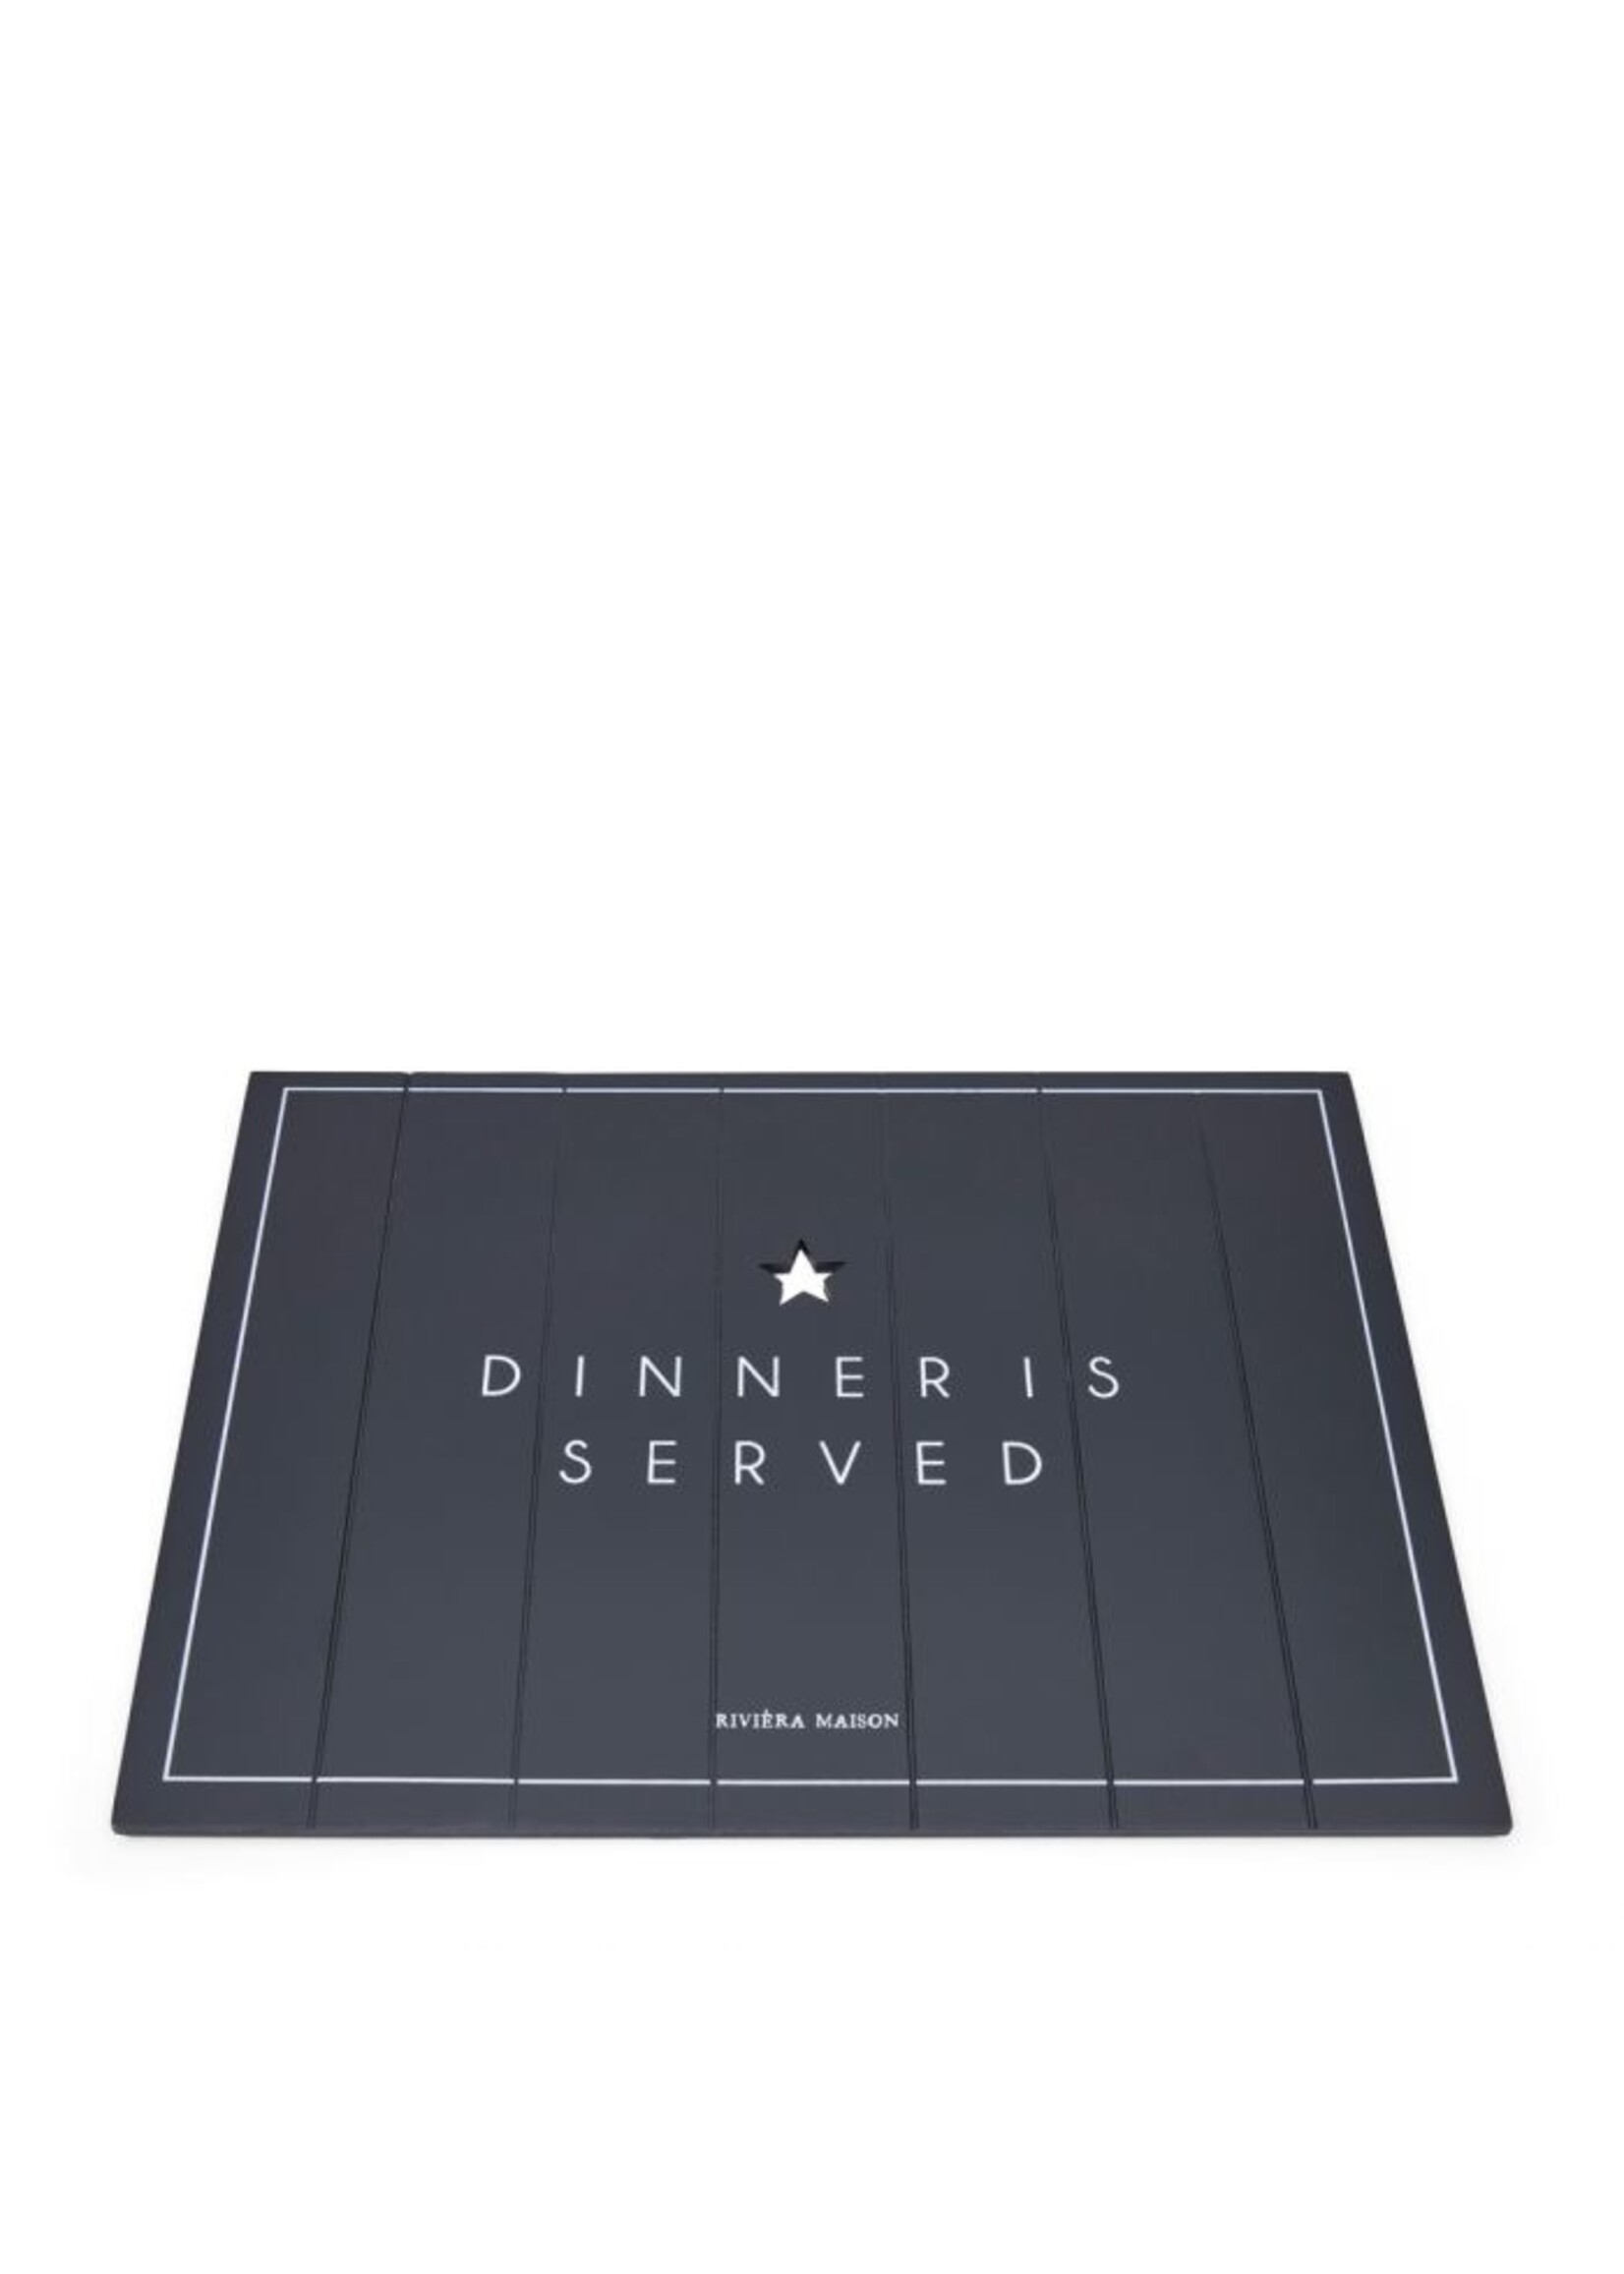 Riviera Maison Dinner Is Served Placemat